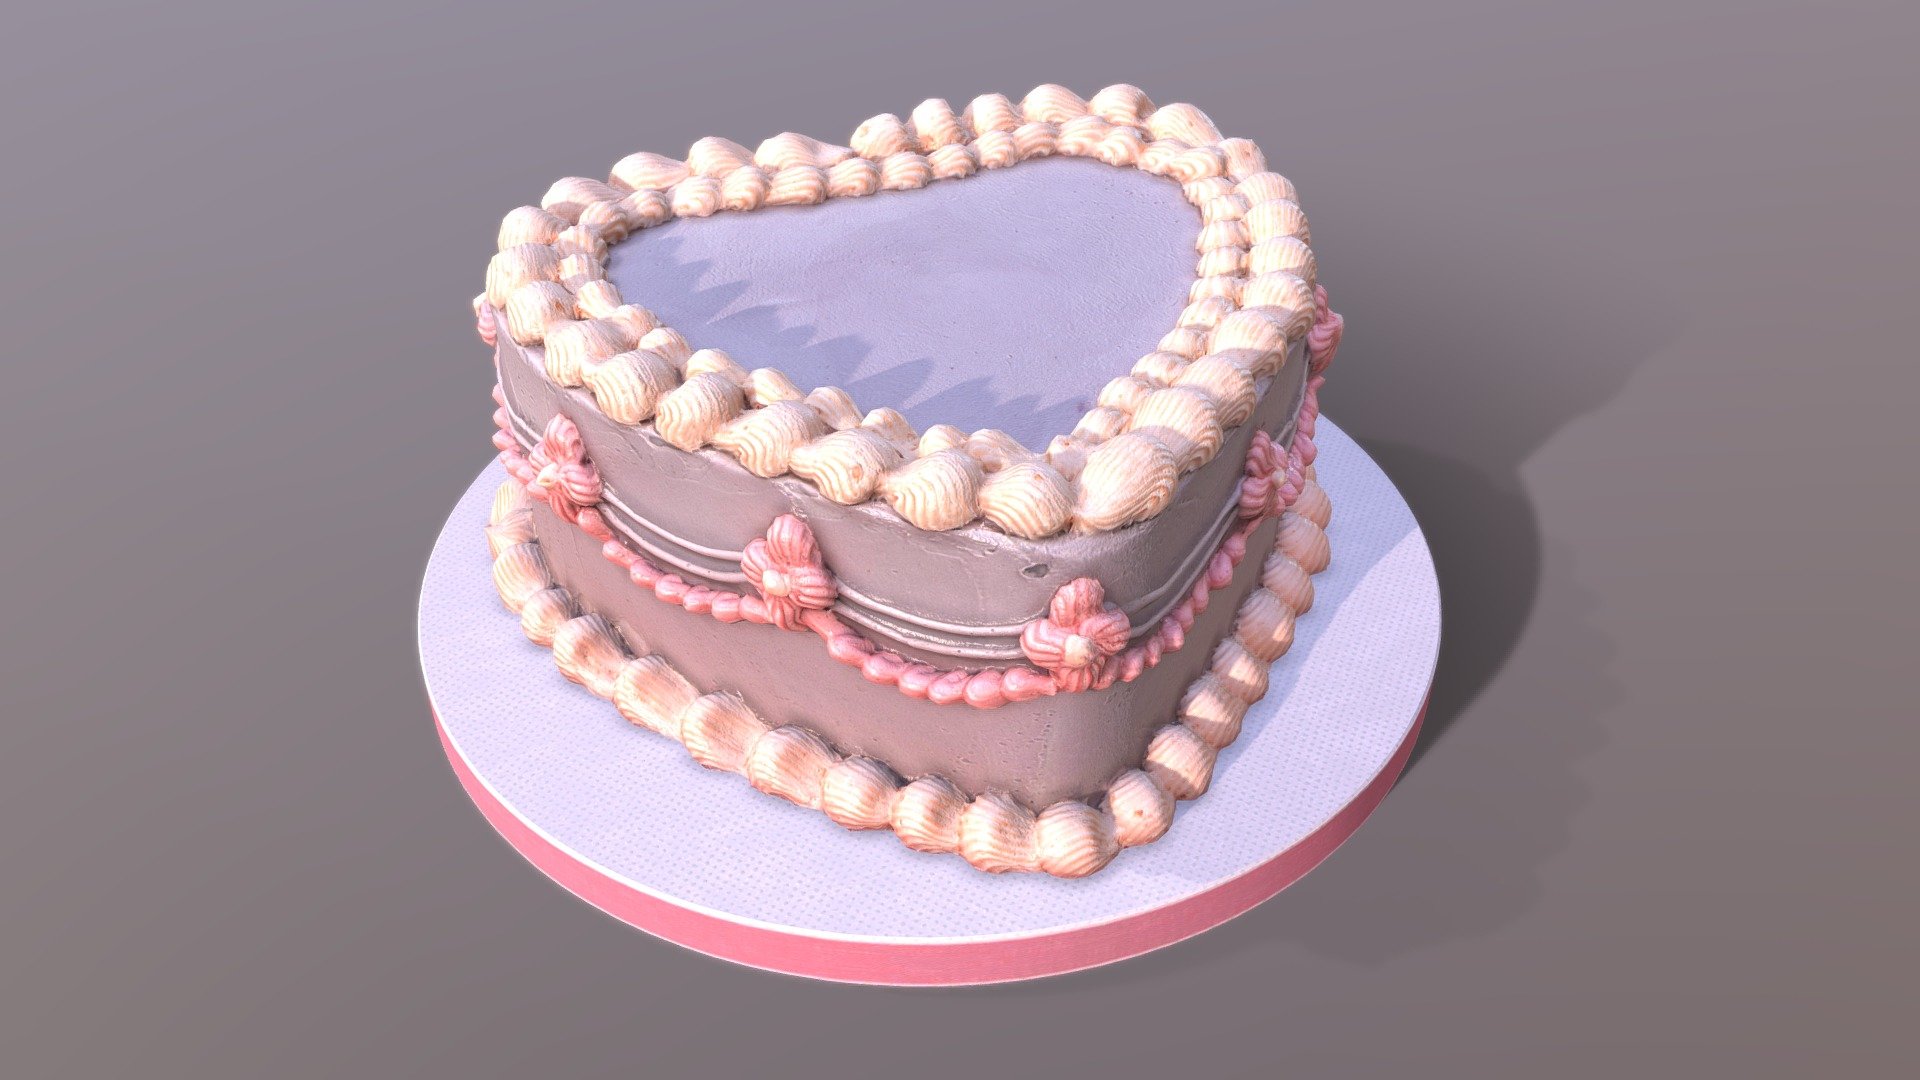 This premium Heart Shaped Gateau model was created using photogrammetry which is made by CAKESBURG Premium Cake Shop in the UK. You can purchase real cake from this link: https://cakesburg.co.uk/products/chocolate-heaven-cake?_pos=1&amp;_sid=25d1b3fb8&amp;_ss=r

Textures 4096*4096px PBR photoscan-based materials Base Color, Normal, Roughness, Specular) - Heart Gateau - Buy Royalty Free 3D model by Cakesburg Premium 3D Cake Shop (@Viscom_Cakesburg) 3d model